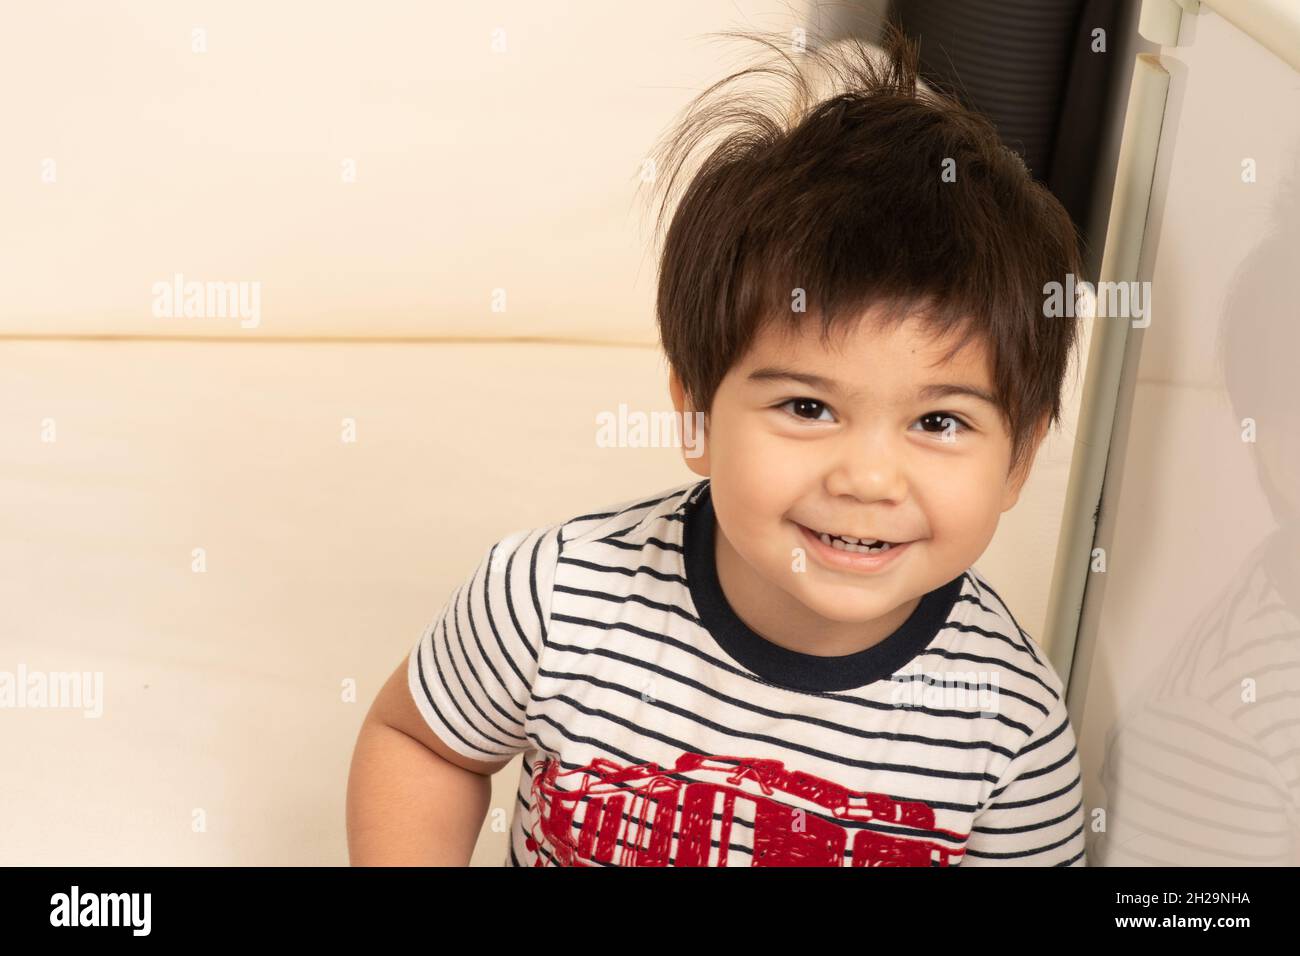 2 of 2 Two year old boy showing his face smiling after hiding behind his hands peek a boo Stock Photo